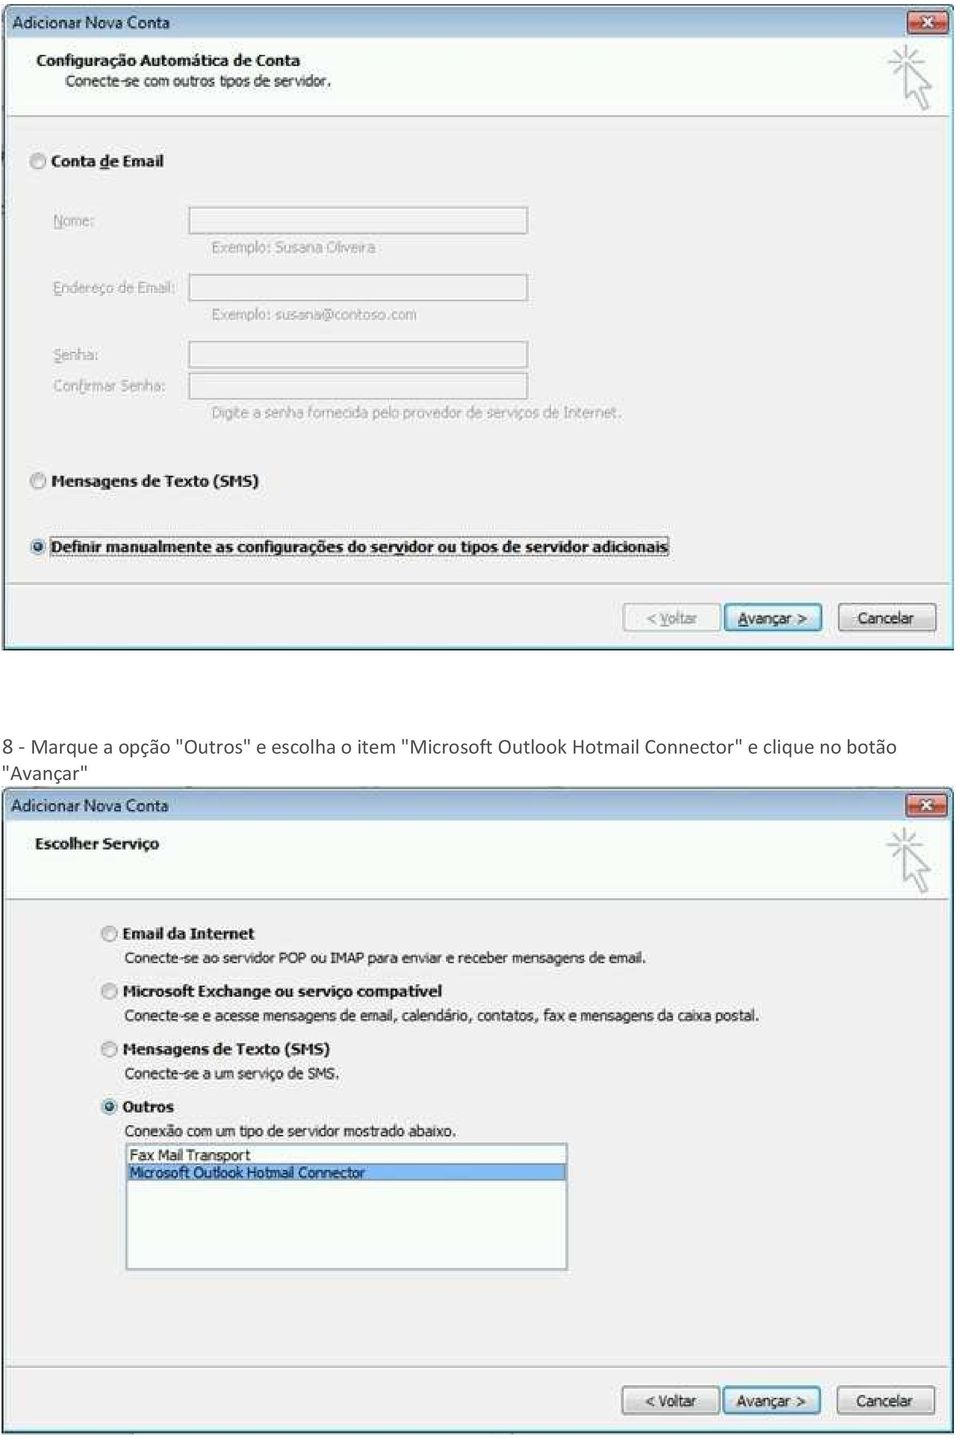 Outlook Hotmail Connector"